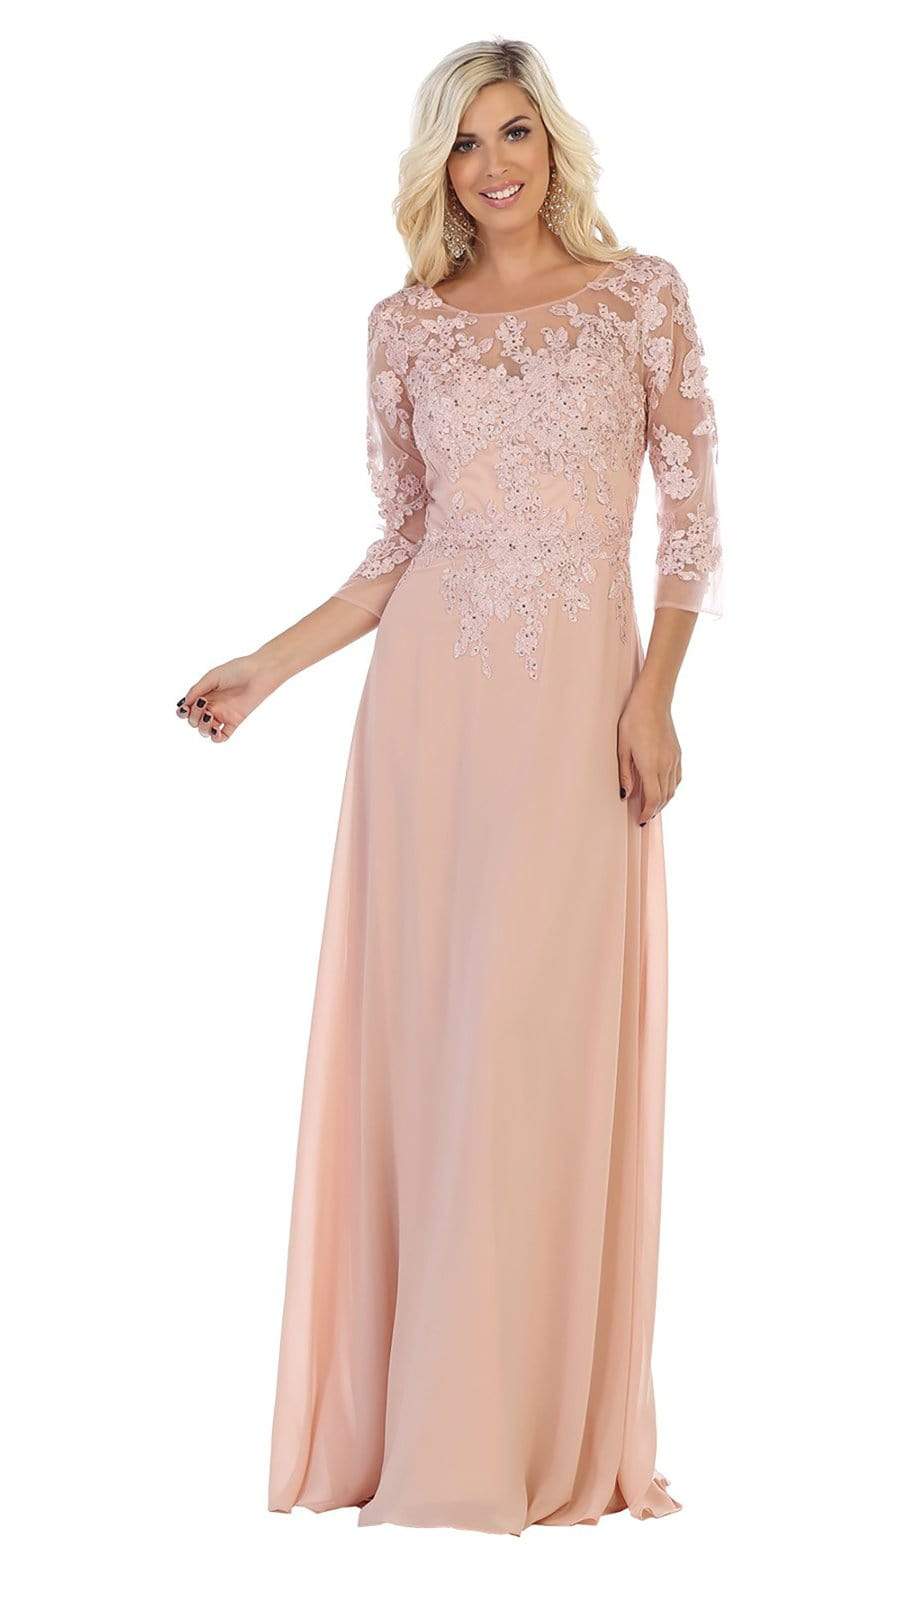 May Queen - MQ1637 Illusion Quarter Sleeve Appliqued Sheath Gown Special Occasion Dress M / Dusty Rose